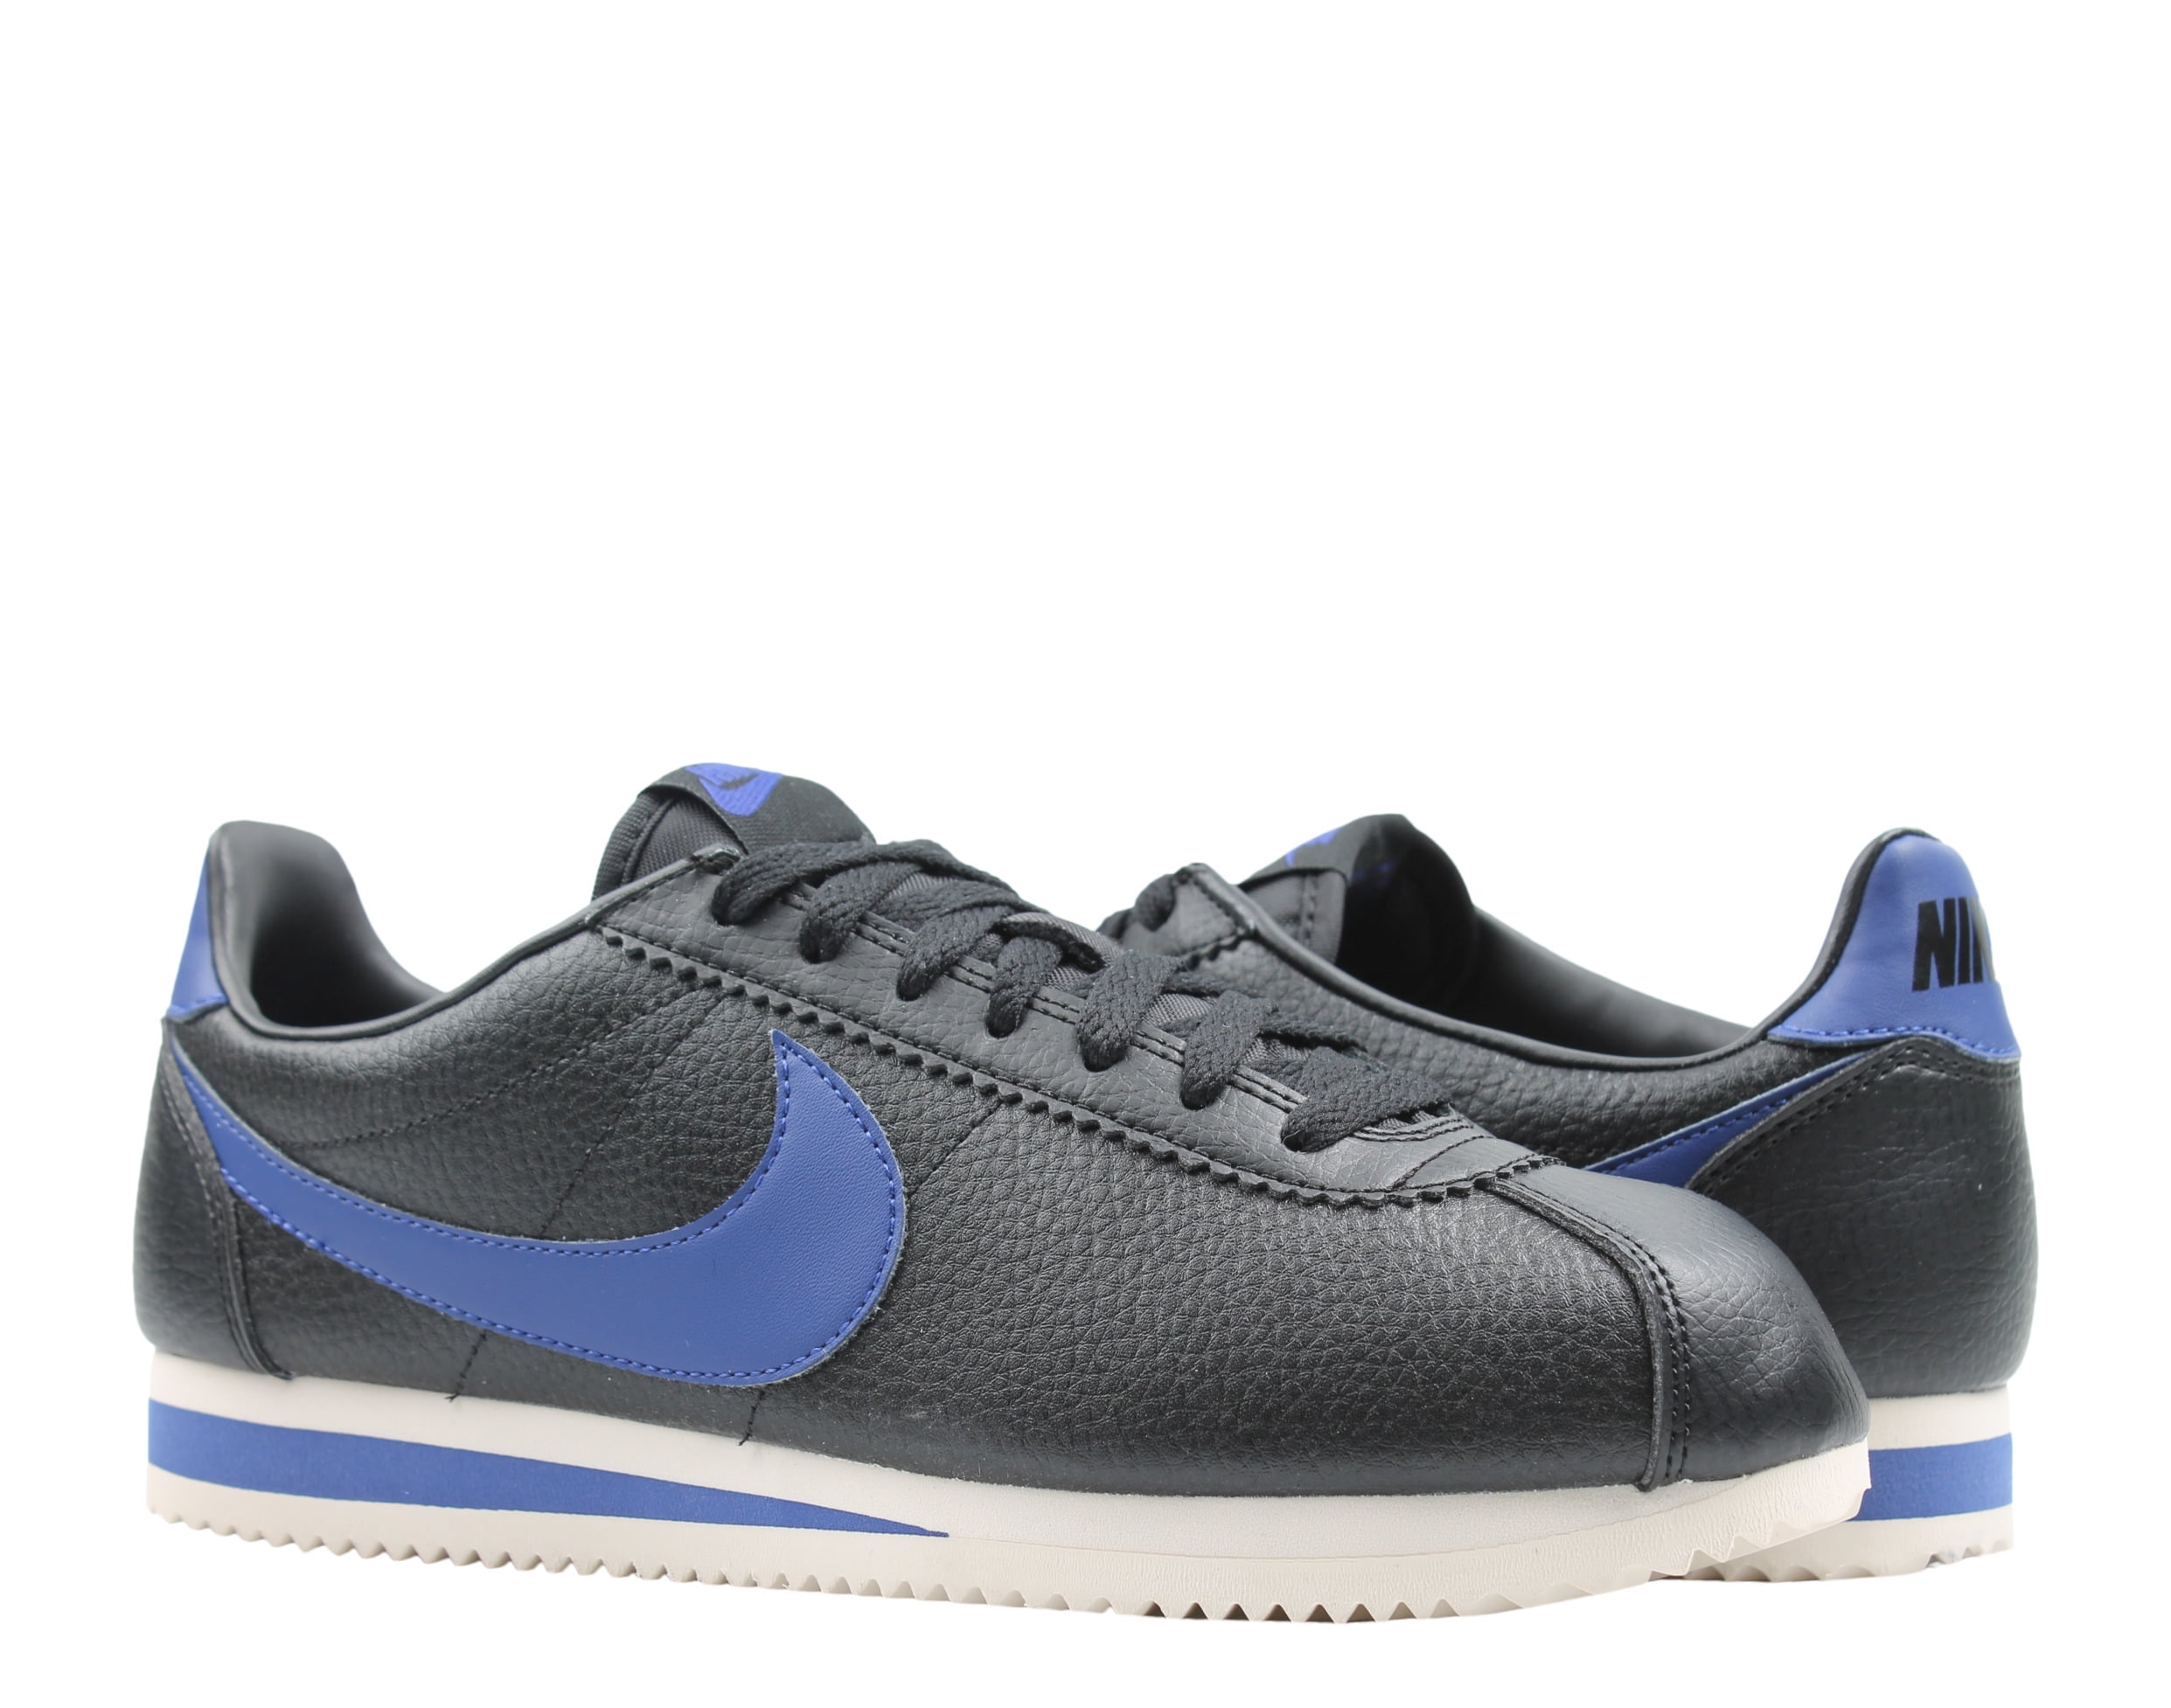 Nike - Nike Classic Cortez Leather Men's Running Shoes Size 9.5 ...